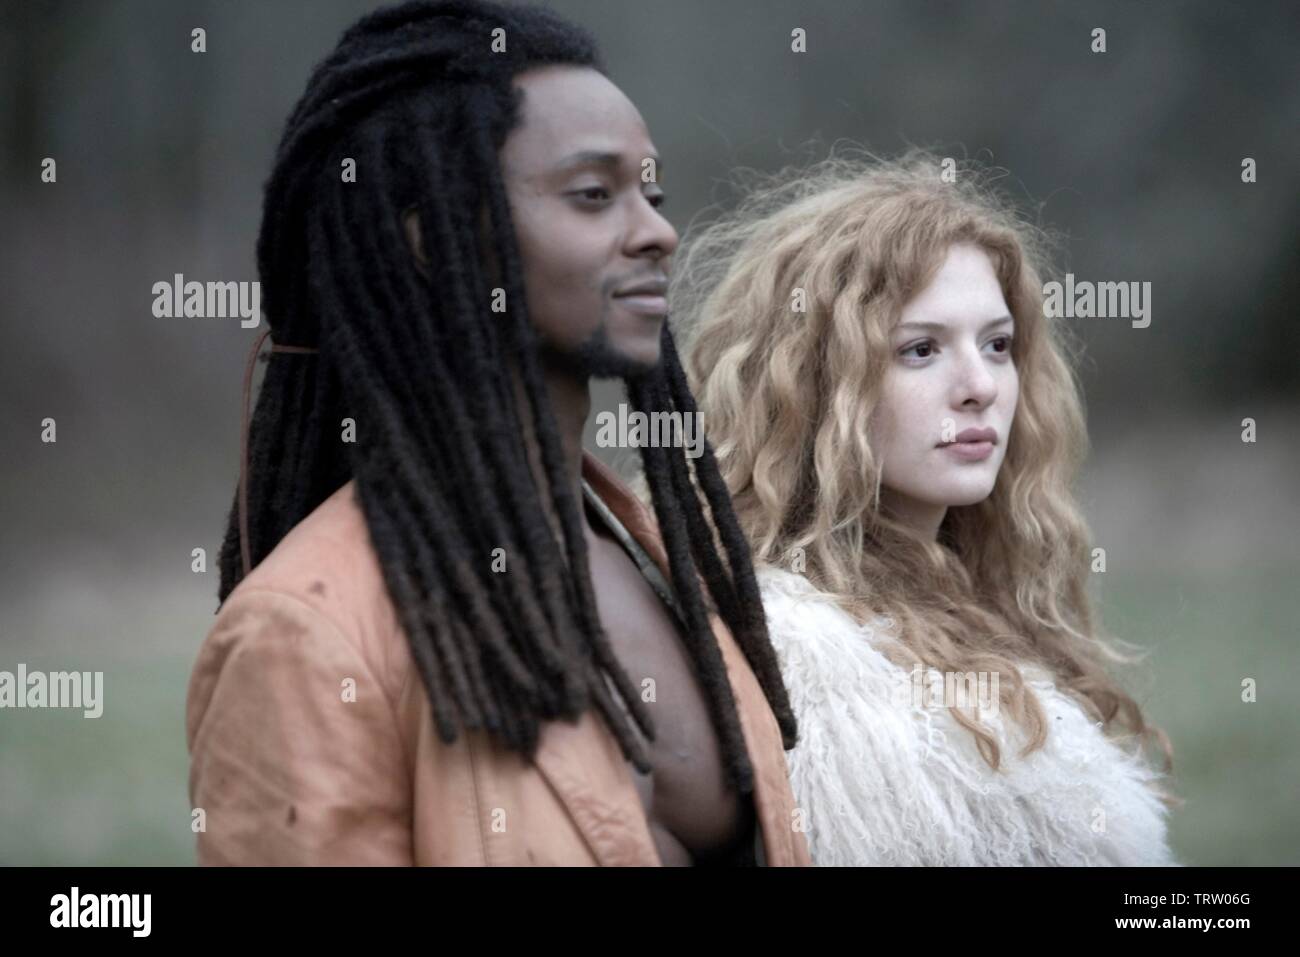 RACHELLE LEFEVRE and EDI GATHEGI in TWILIGHT (2008). Copyright: Editorial use only. No merchandising or book covers. This is a publicly distributed handout. Access rights only, no license of copyright provided. Only to be reproduced in conjunction with promotion of this film. Credit: IMPRINT ENTERTAINMENT/MAVERICK FILMS/SUMMIT ENTERTAINMENT/ / Album Stock Photo